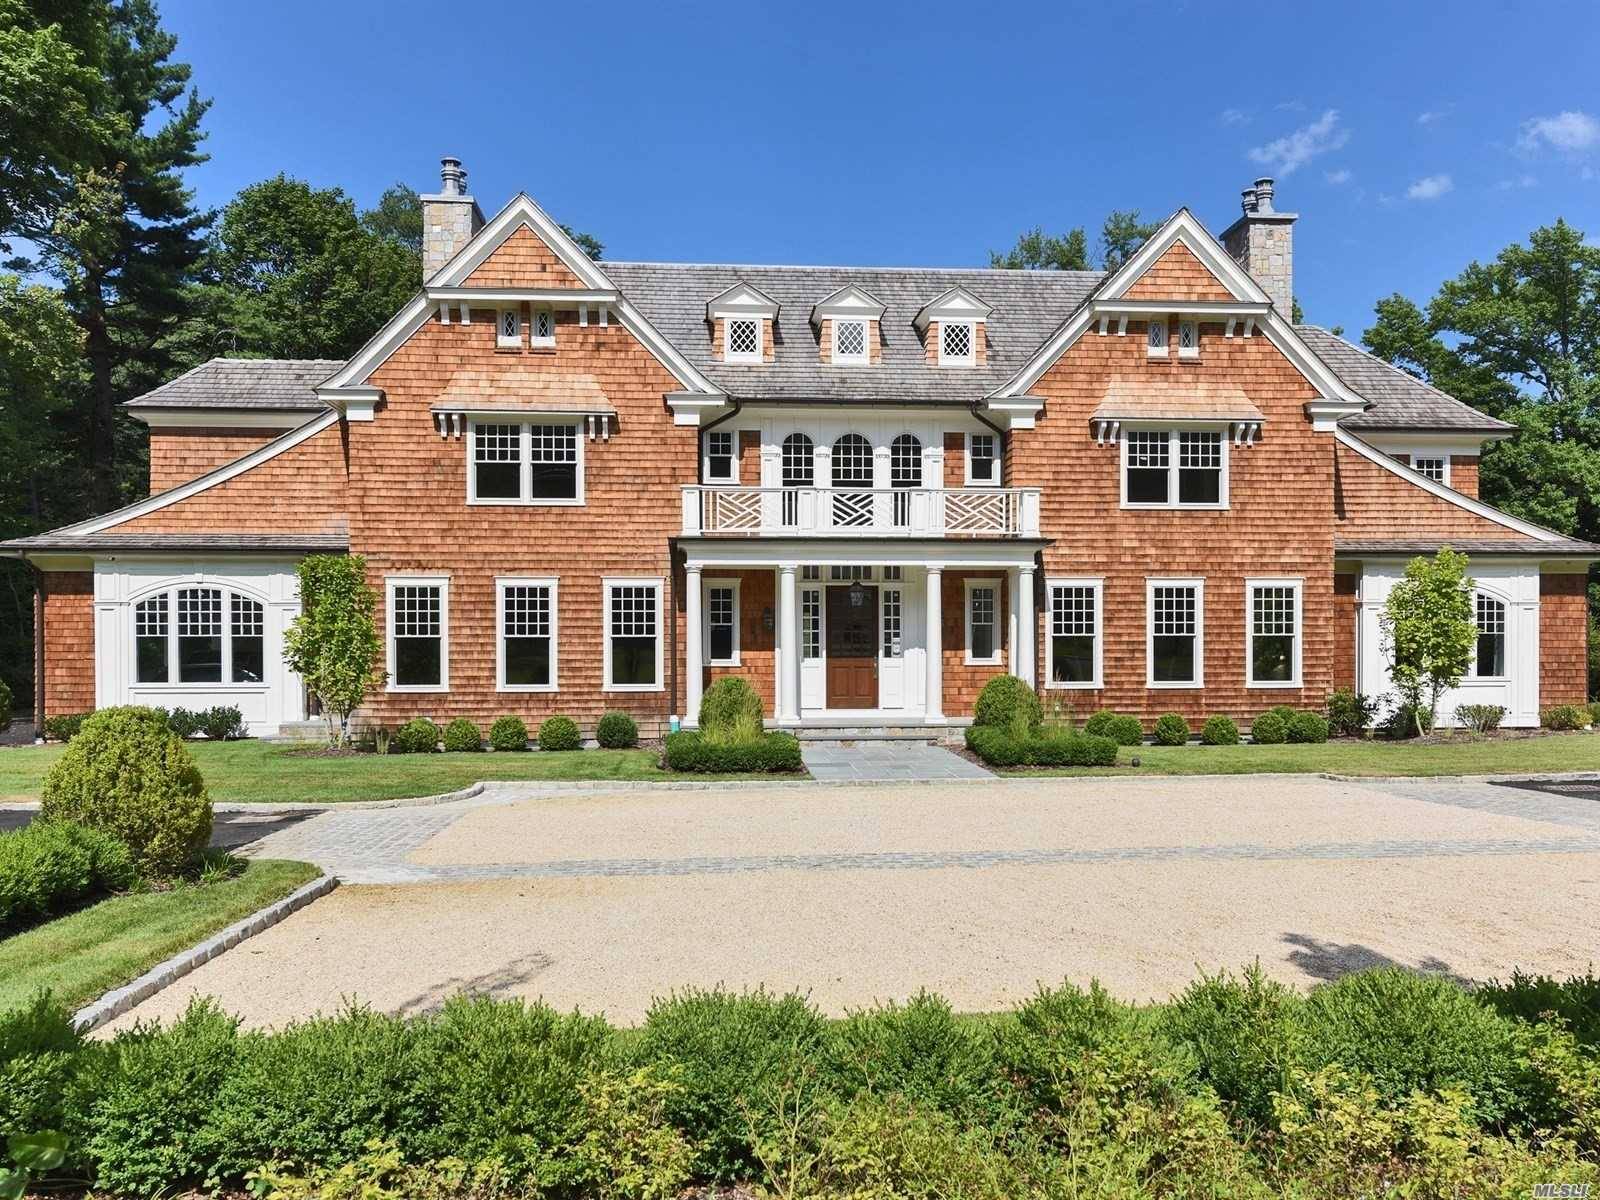 Cedar Manor A Newly Constructed Masterpiece Setting The New Standard For Luxury Offering 6 Bedroom, 6.